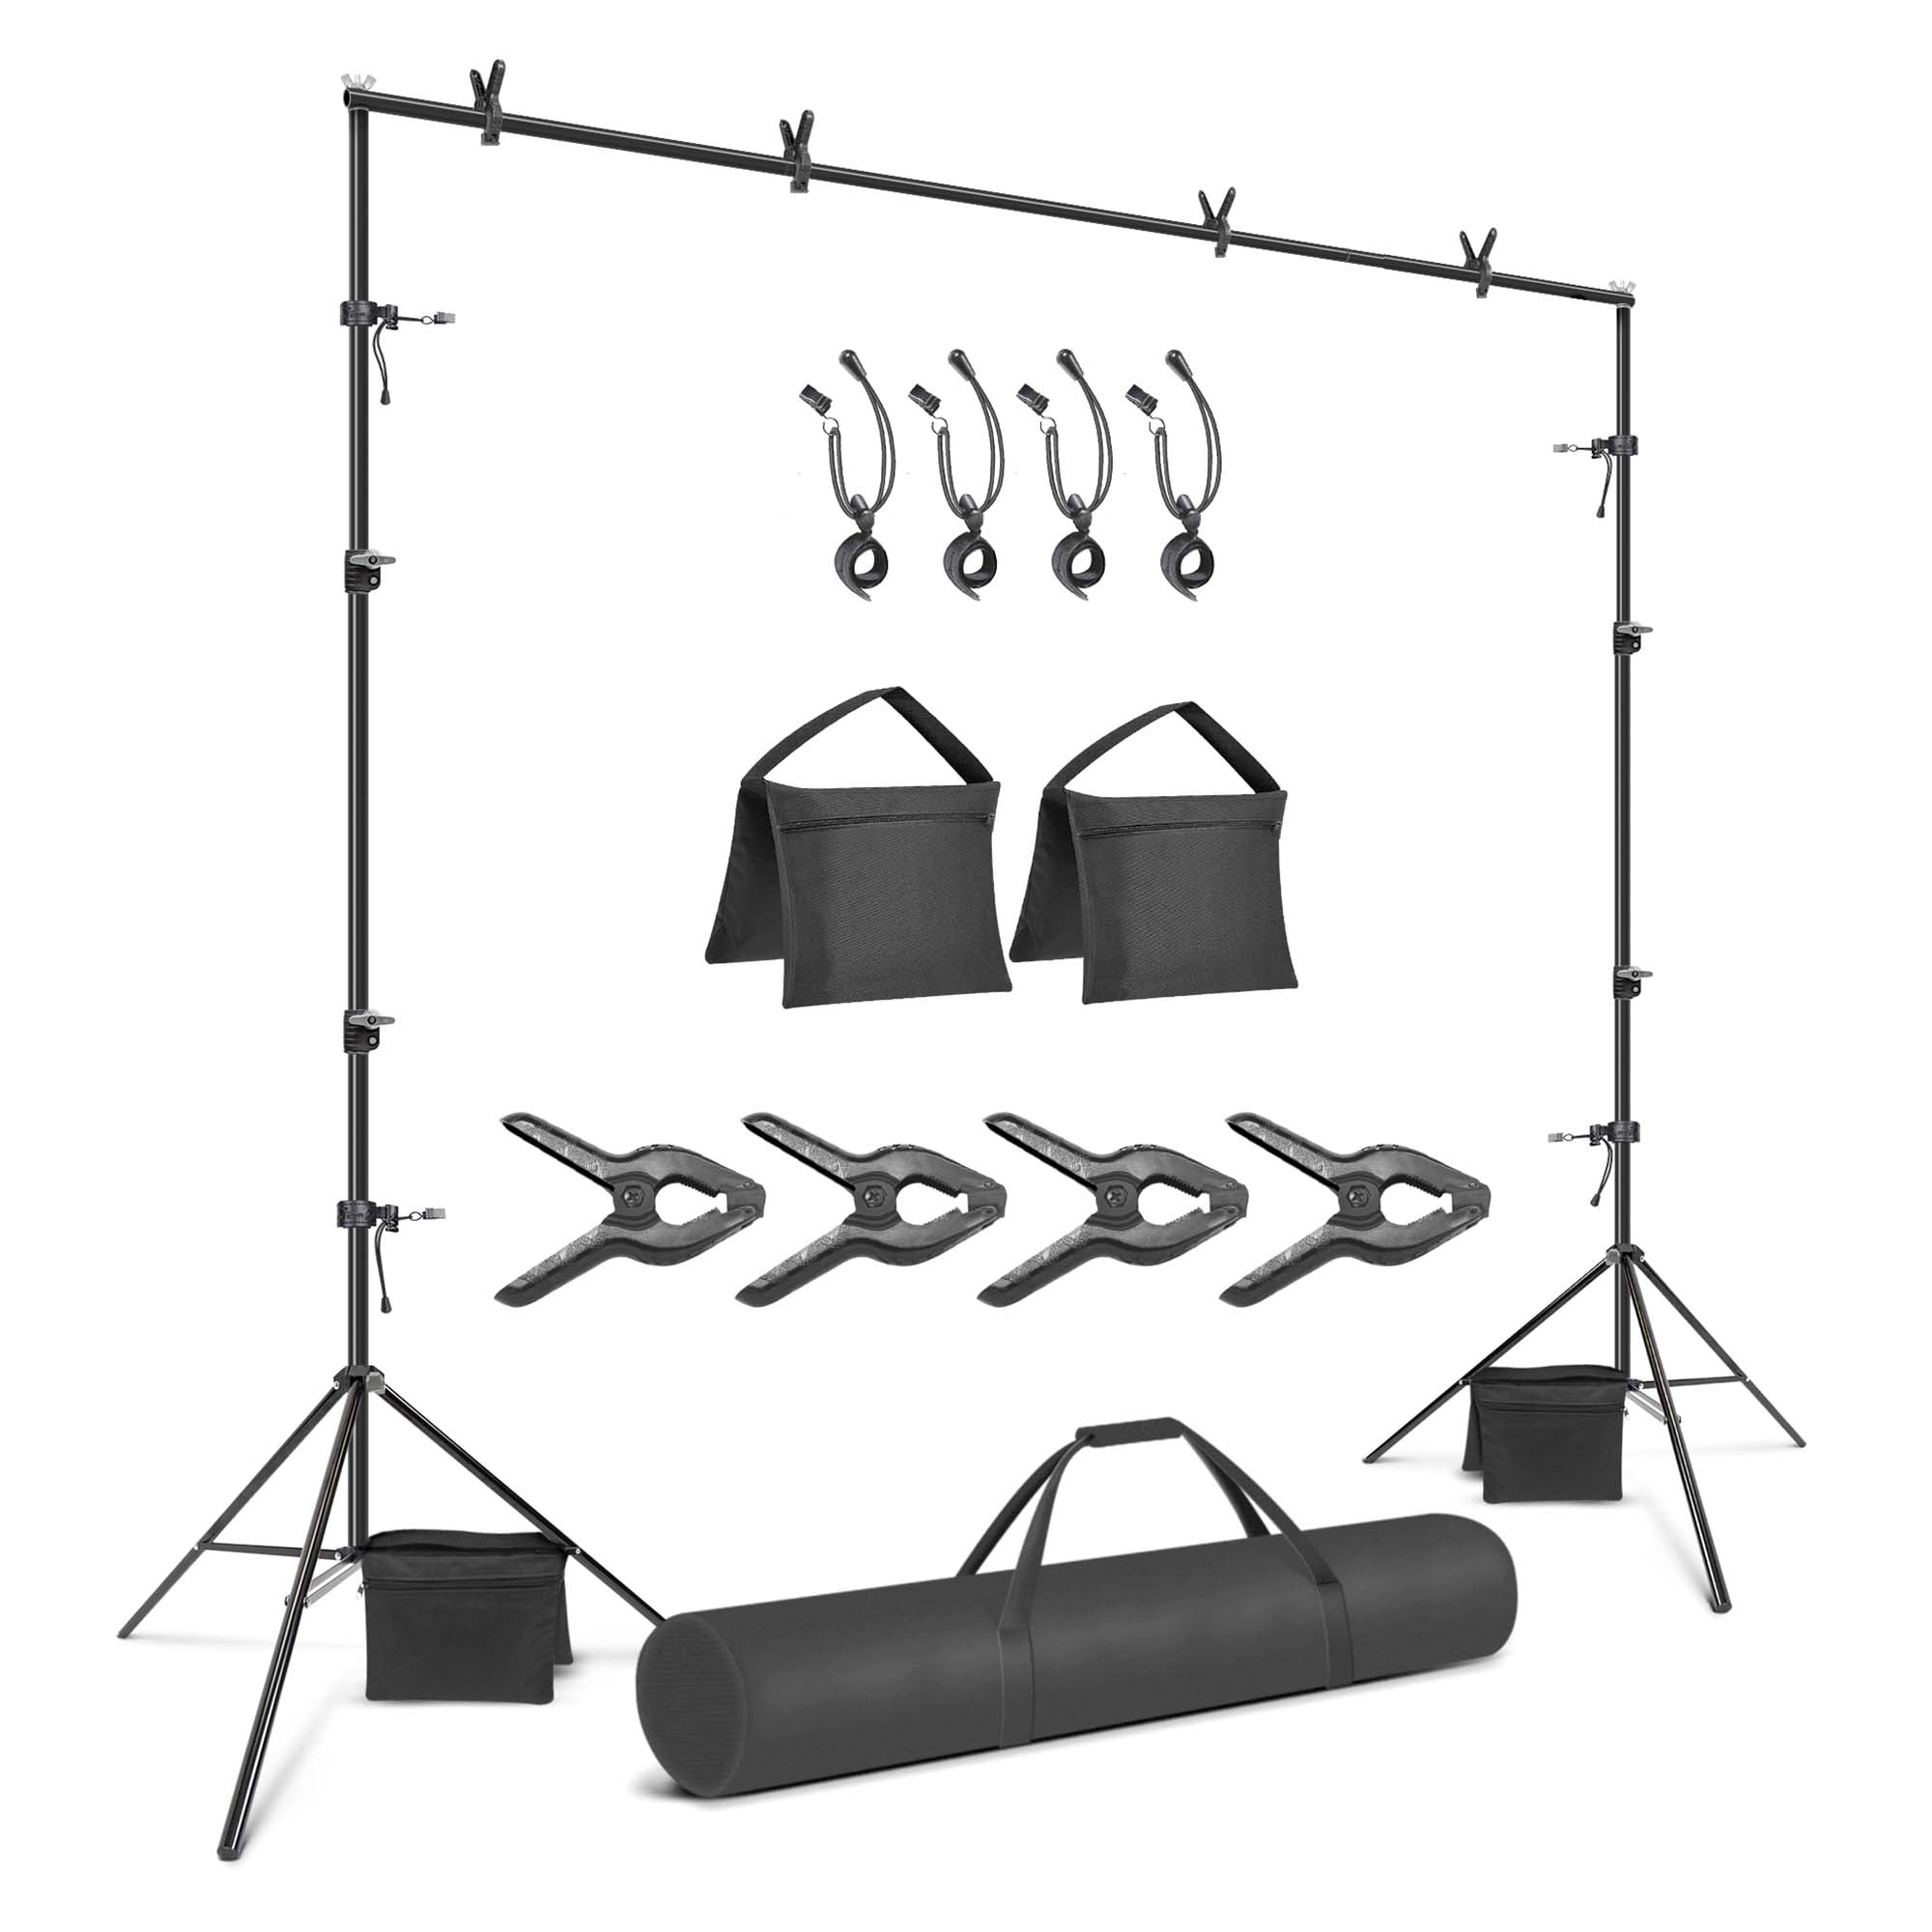 2 YYFANGYF Photo Video Studio Background Stand Kit 6 Color Photography Backdrop to Choose from Telescopic Crossbar with Storage Bag Easy to Carry 7x3m Double- Layer Photography Support System